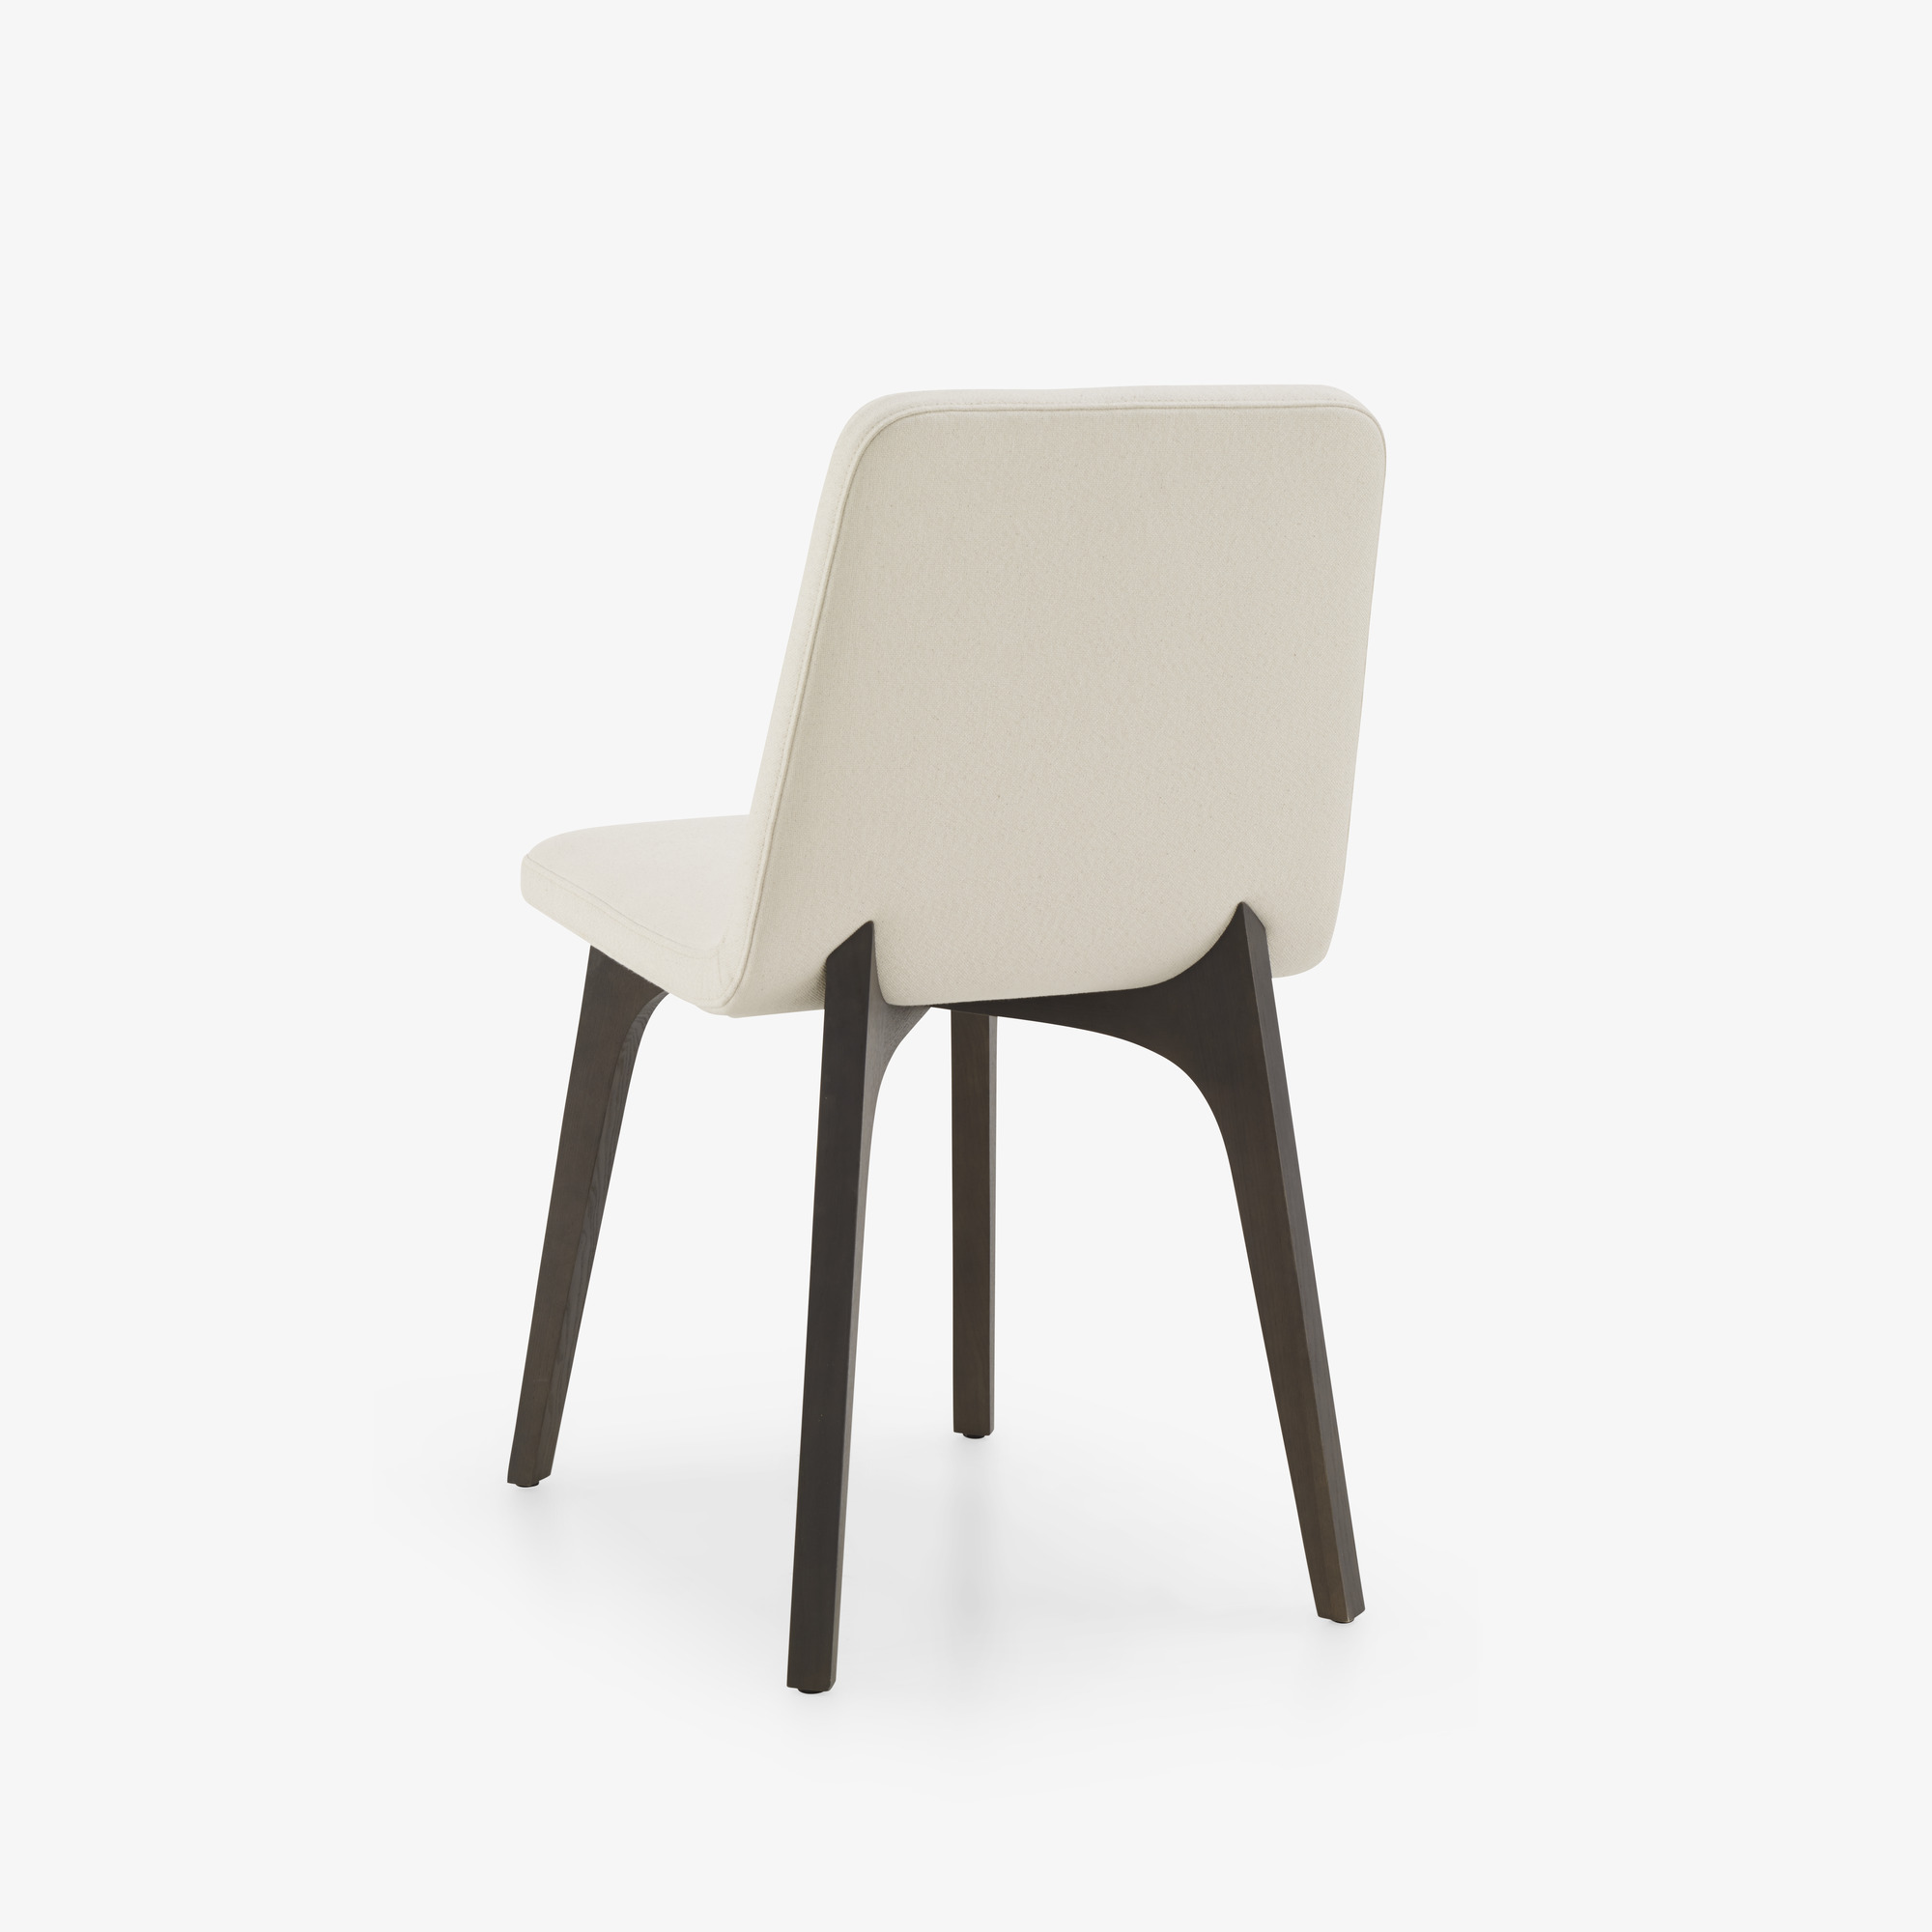 Image Dining chair wooden base 11